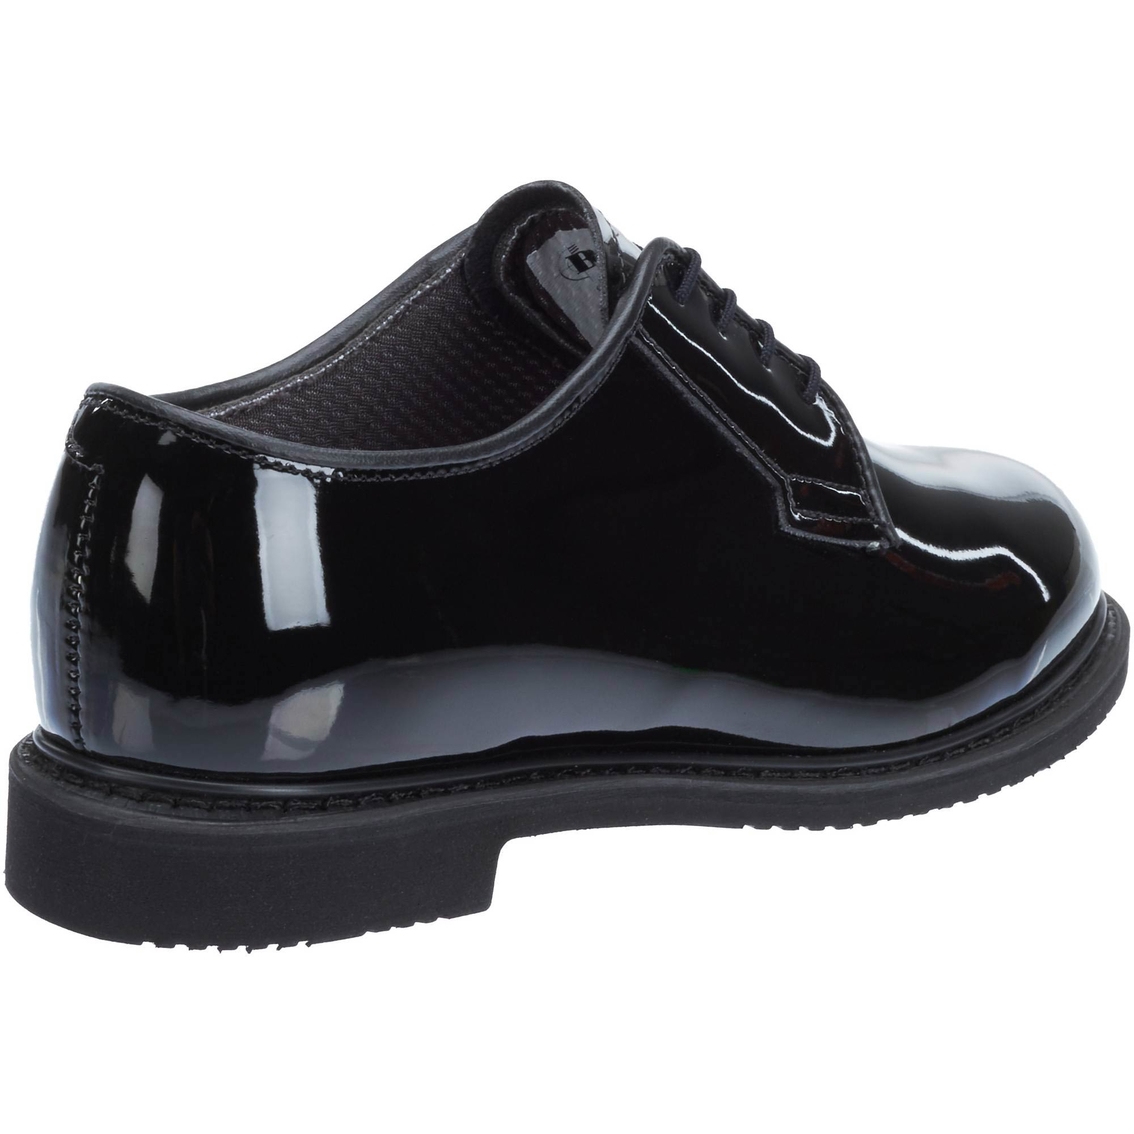 Bate Women's Black Oxford Shoes 731 - Image 5 of 8